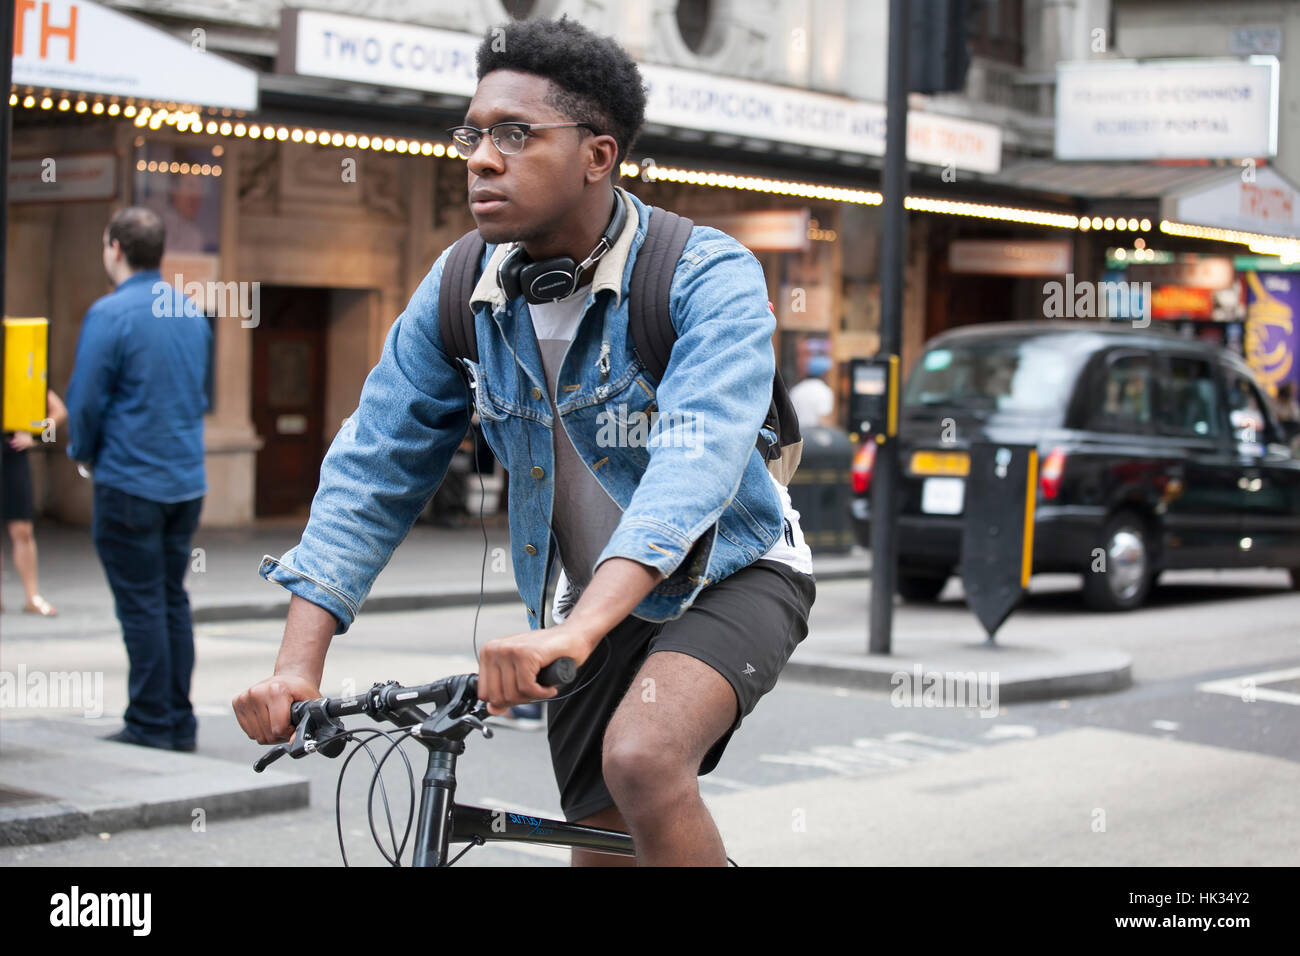 LONDON, ENGLAND - JULY 12, 2016 Serious young man in a denim jacket and short shorts riding a bicycle on the street Stock Photo